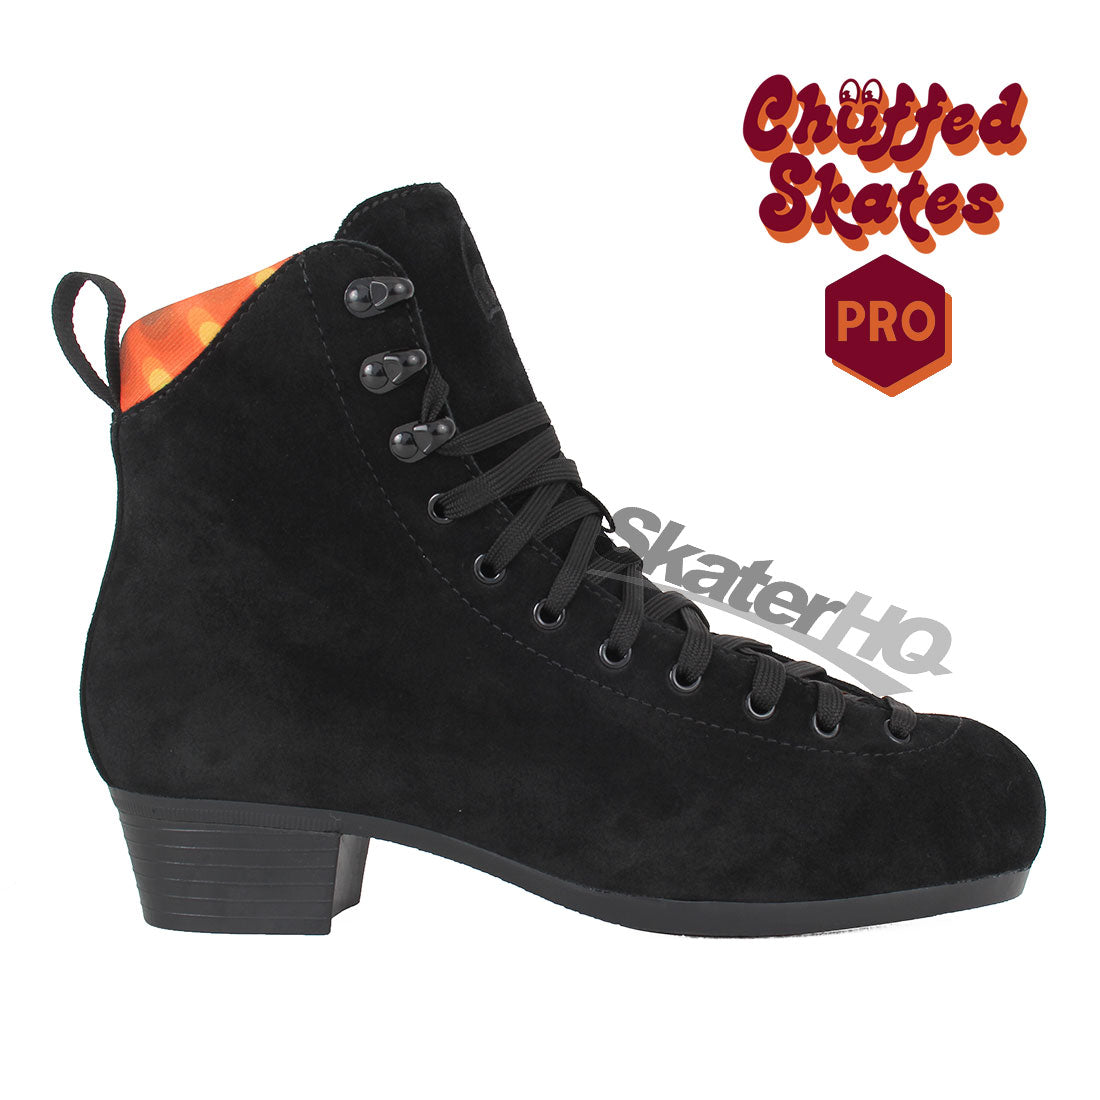 Chuffed Pro Boot Black 7US Roller Skate Boots